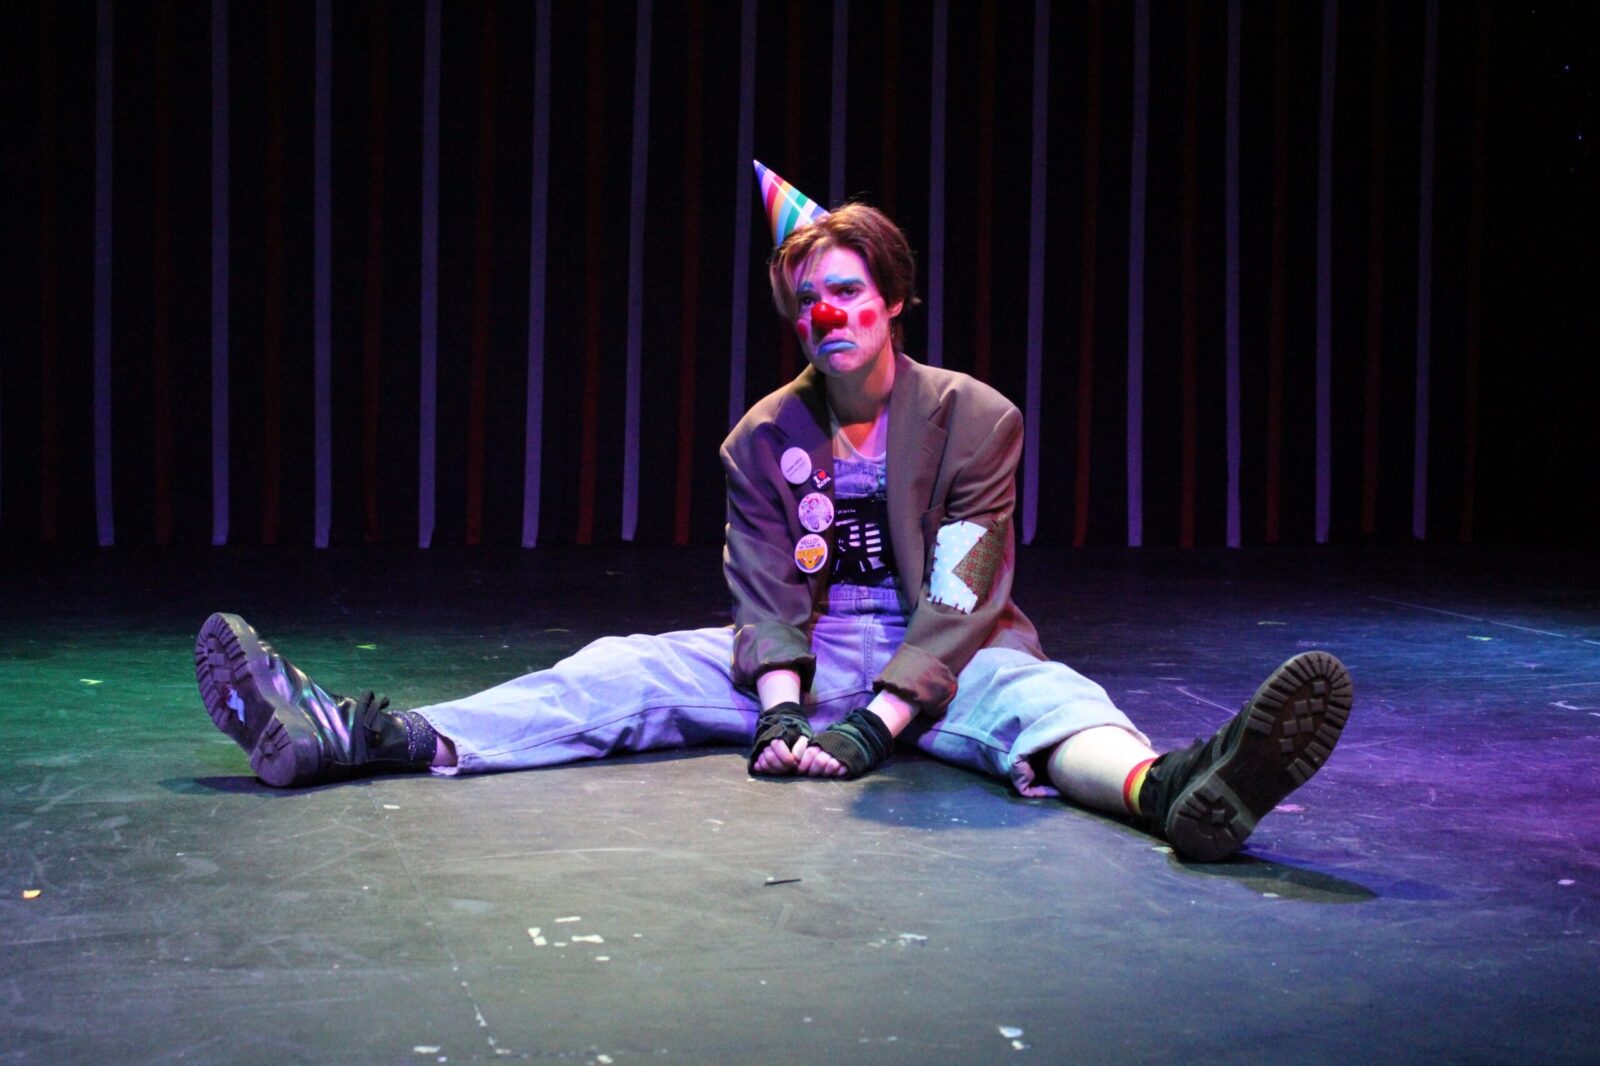 an actor sits on stage with legs sprawled wearing jeans, a jacket, a cone birthday hat and clown makeup